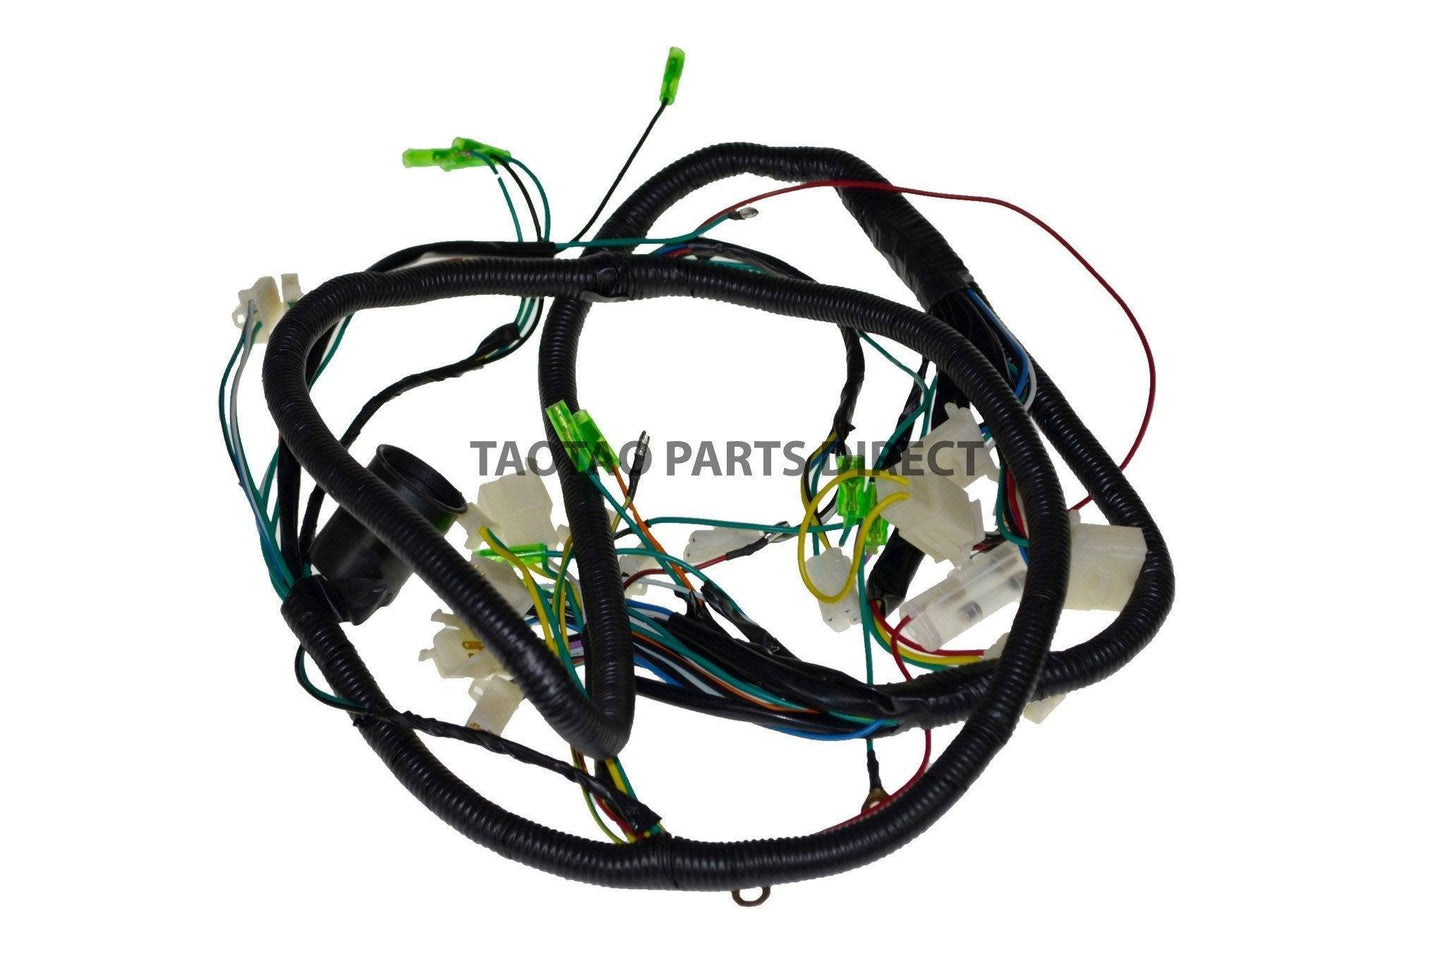 Thunder50 Wire Harness - TaoTao Parts Direct